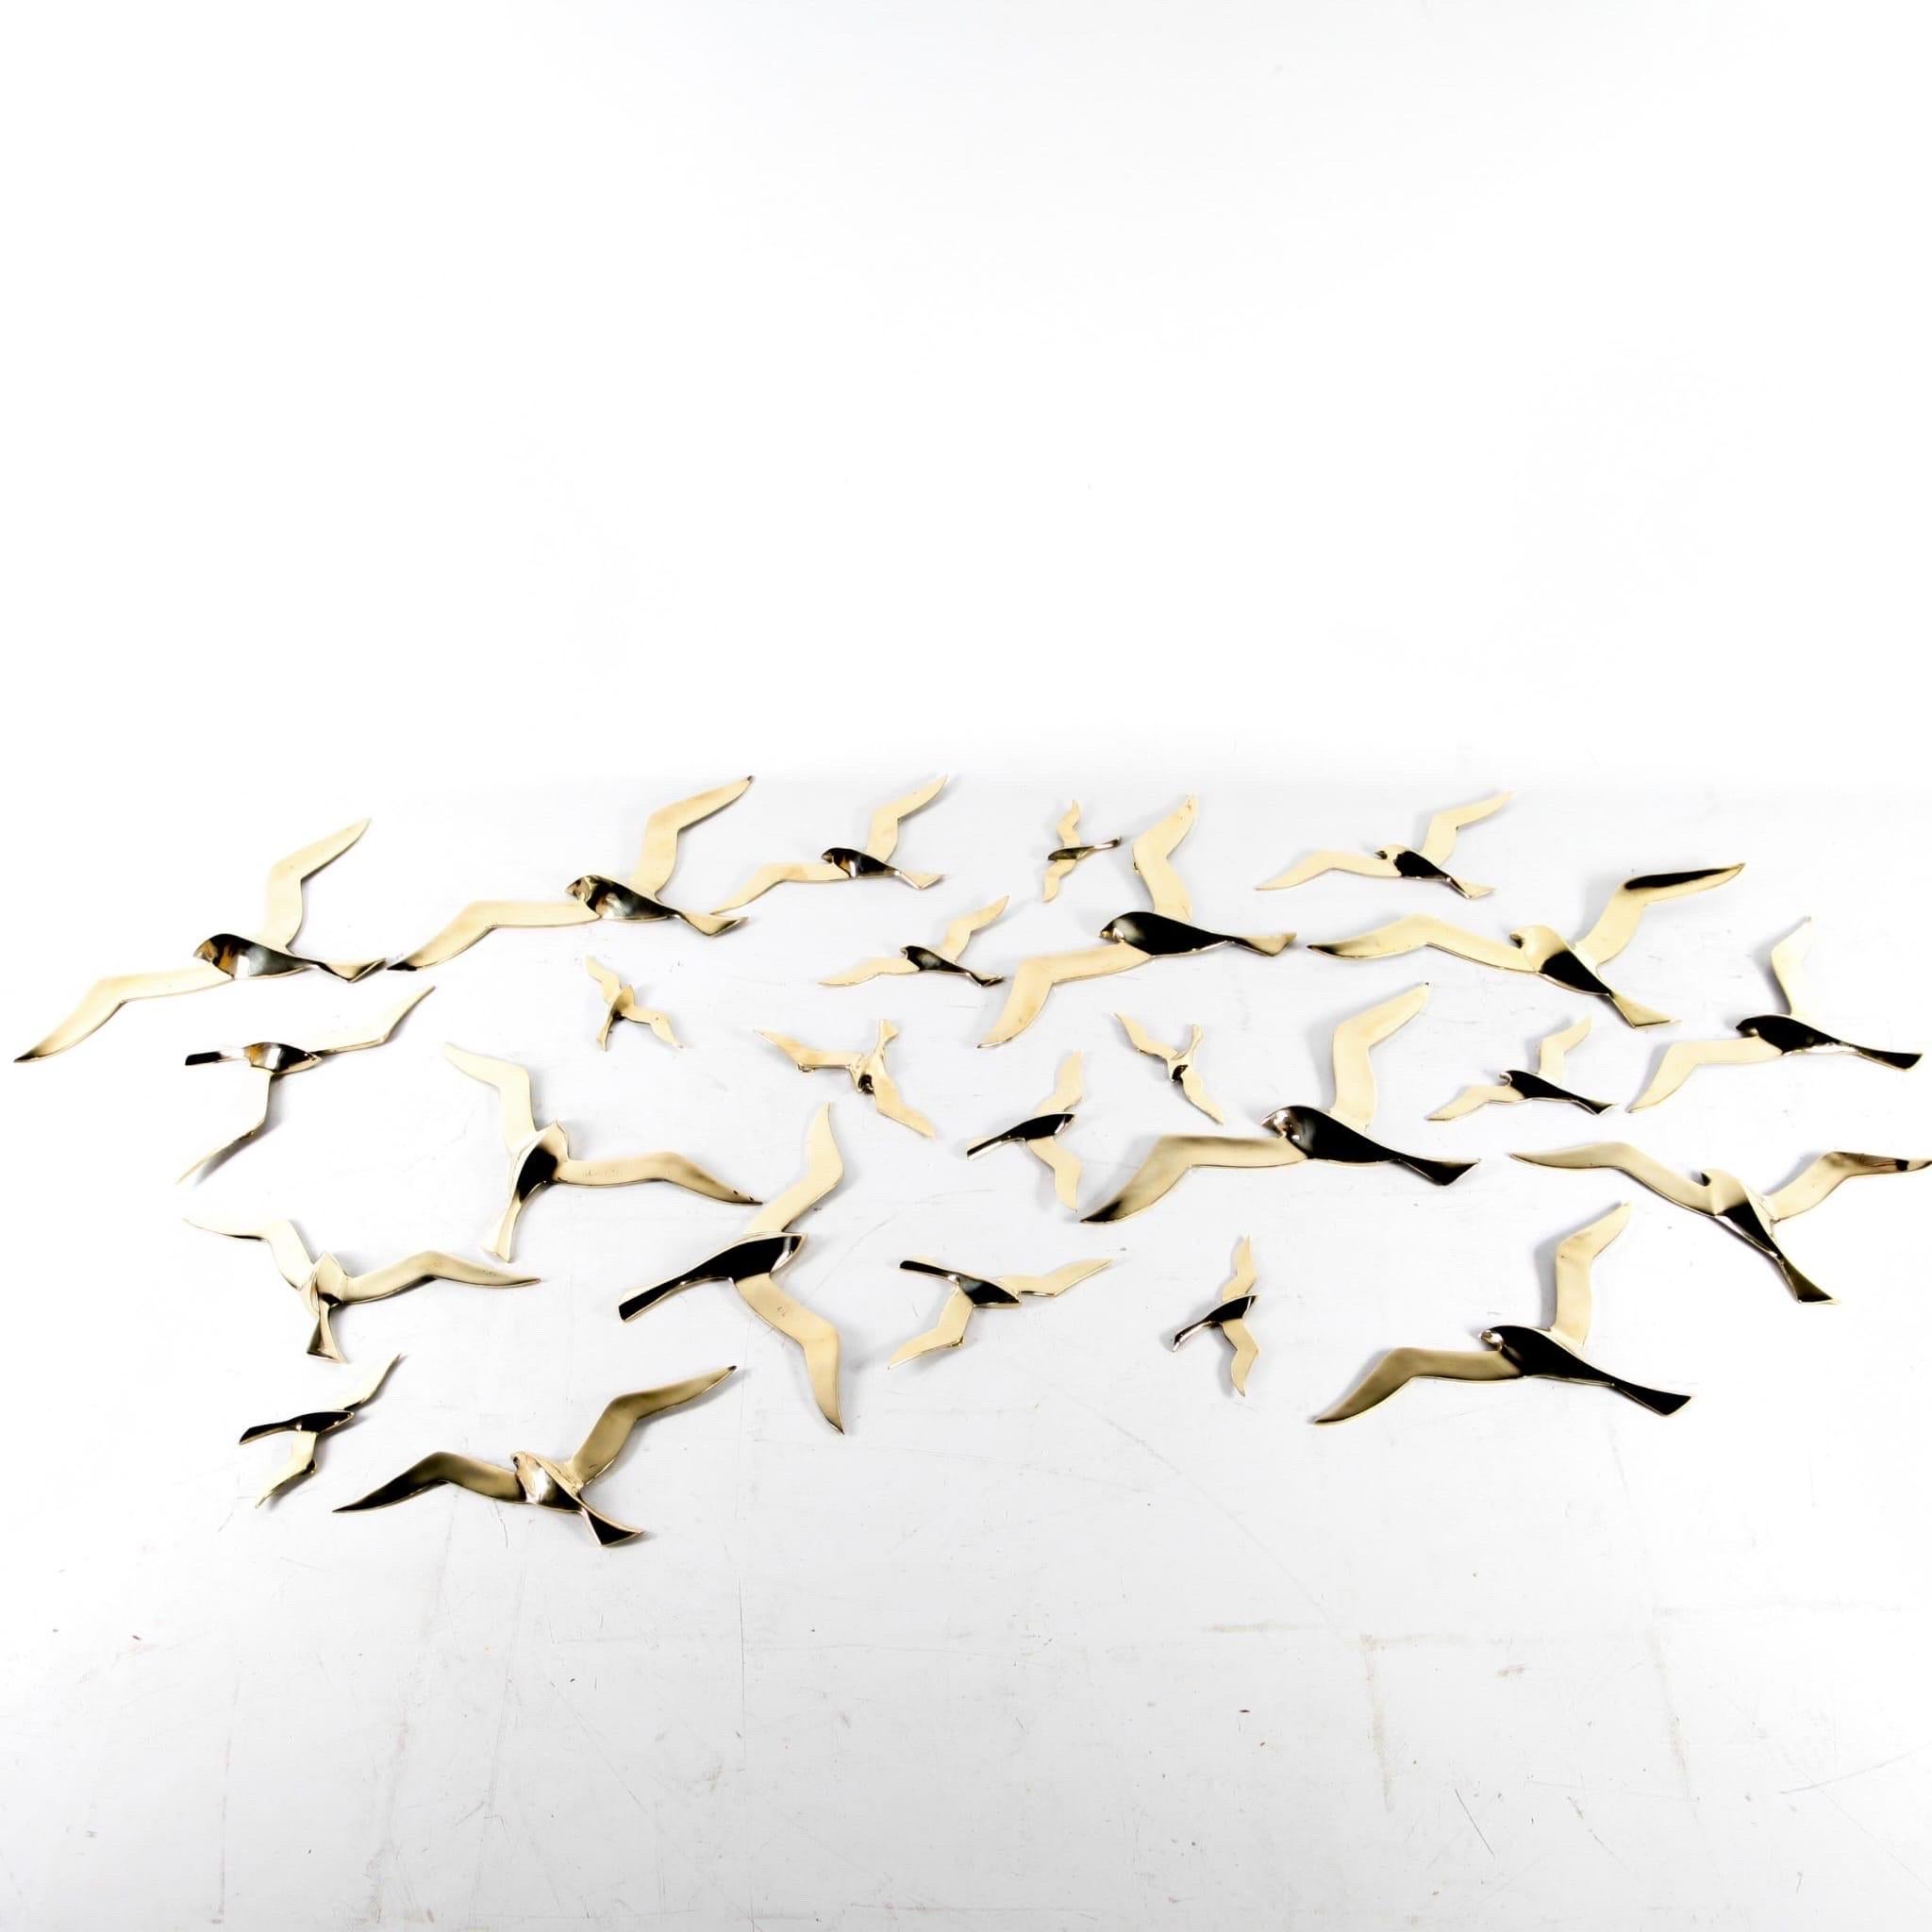 Exceptional set of 25 gilded brass birds wall sculptures. One hook behind each to hang them on the wall. 
Very decorative set with 5 different dimensions:
45x18cm
36x23
31x17
21x12
17x9
Great quality, very good condition. 
